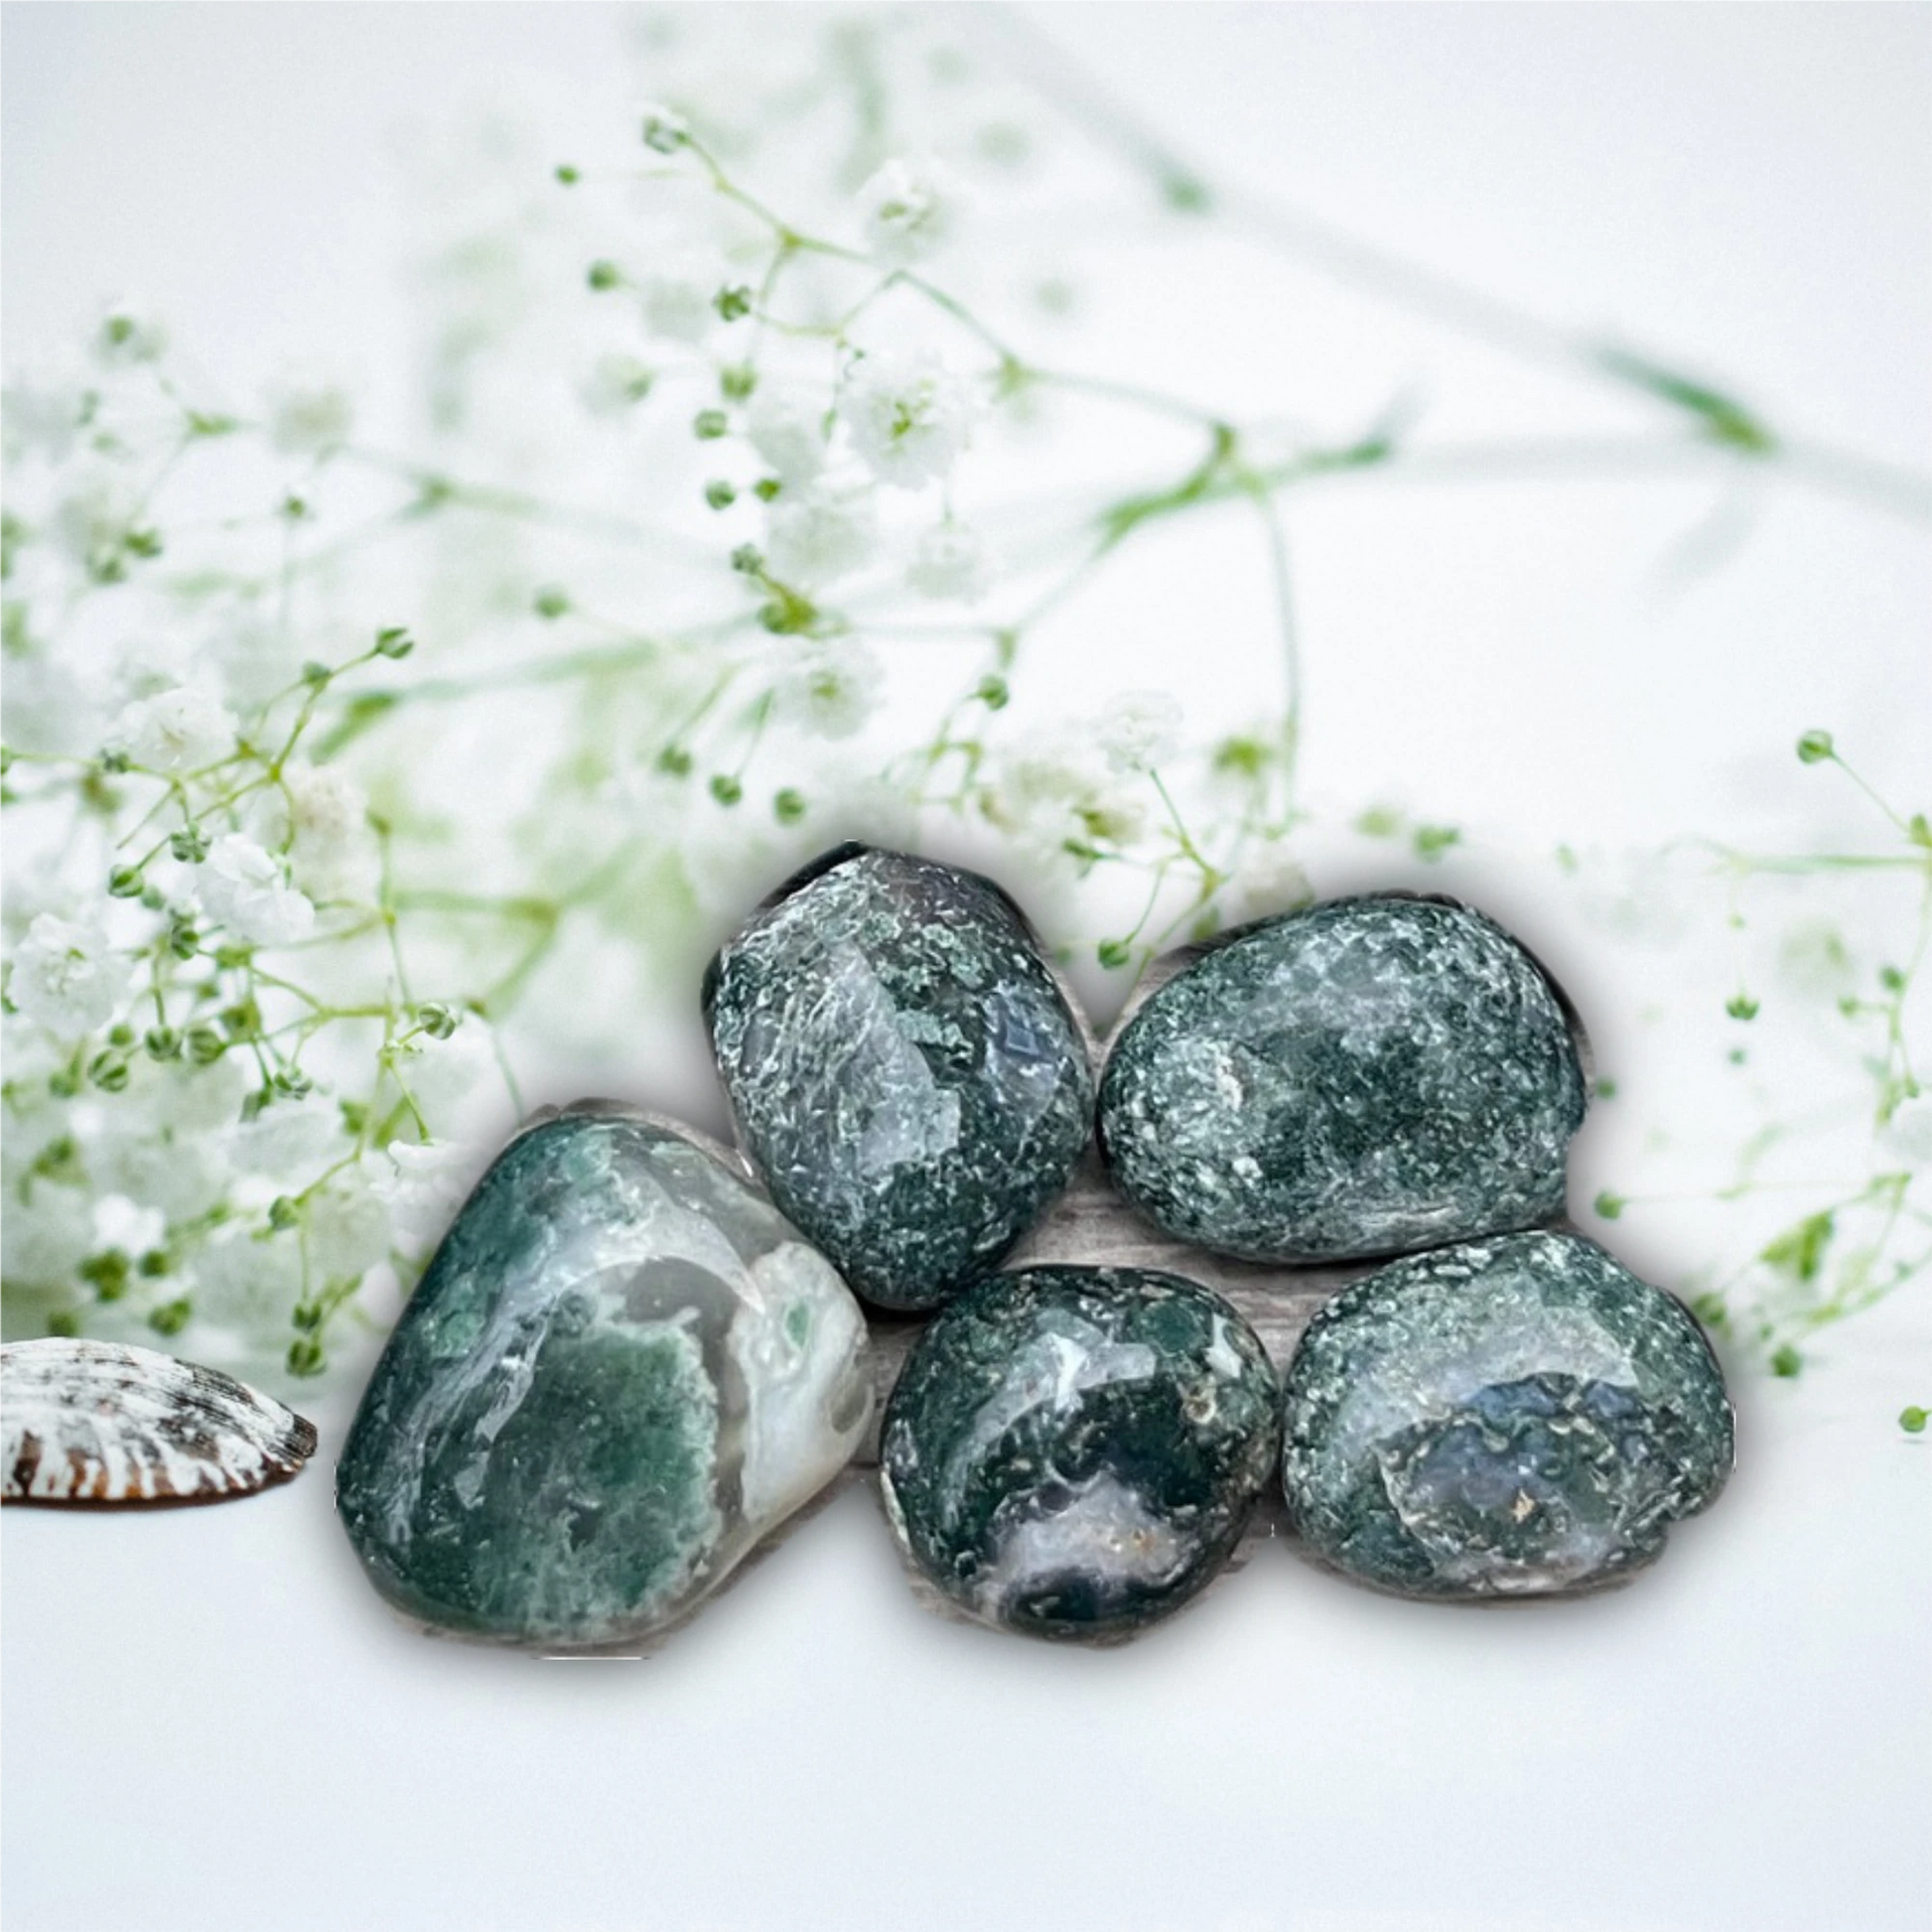 © SASARA • Mindfully-Sourced, High-Quality Moss Agate Fluorite Crystals